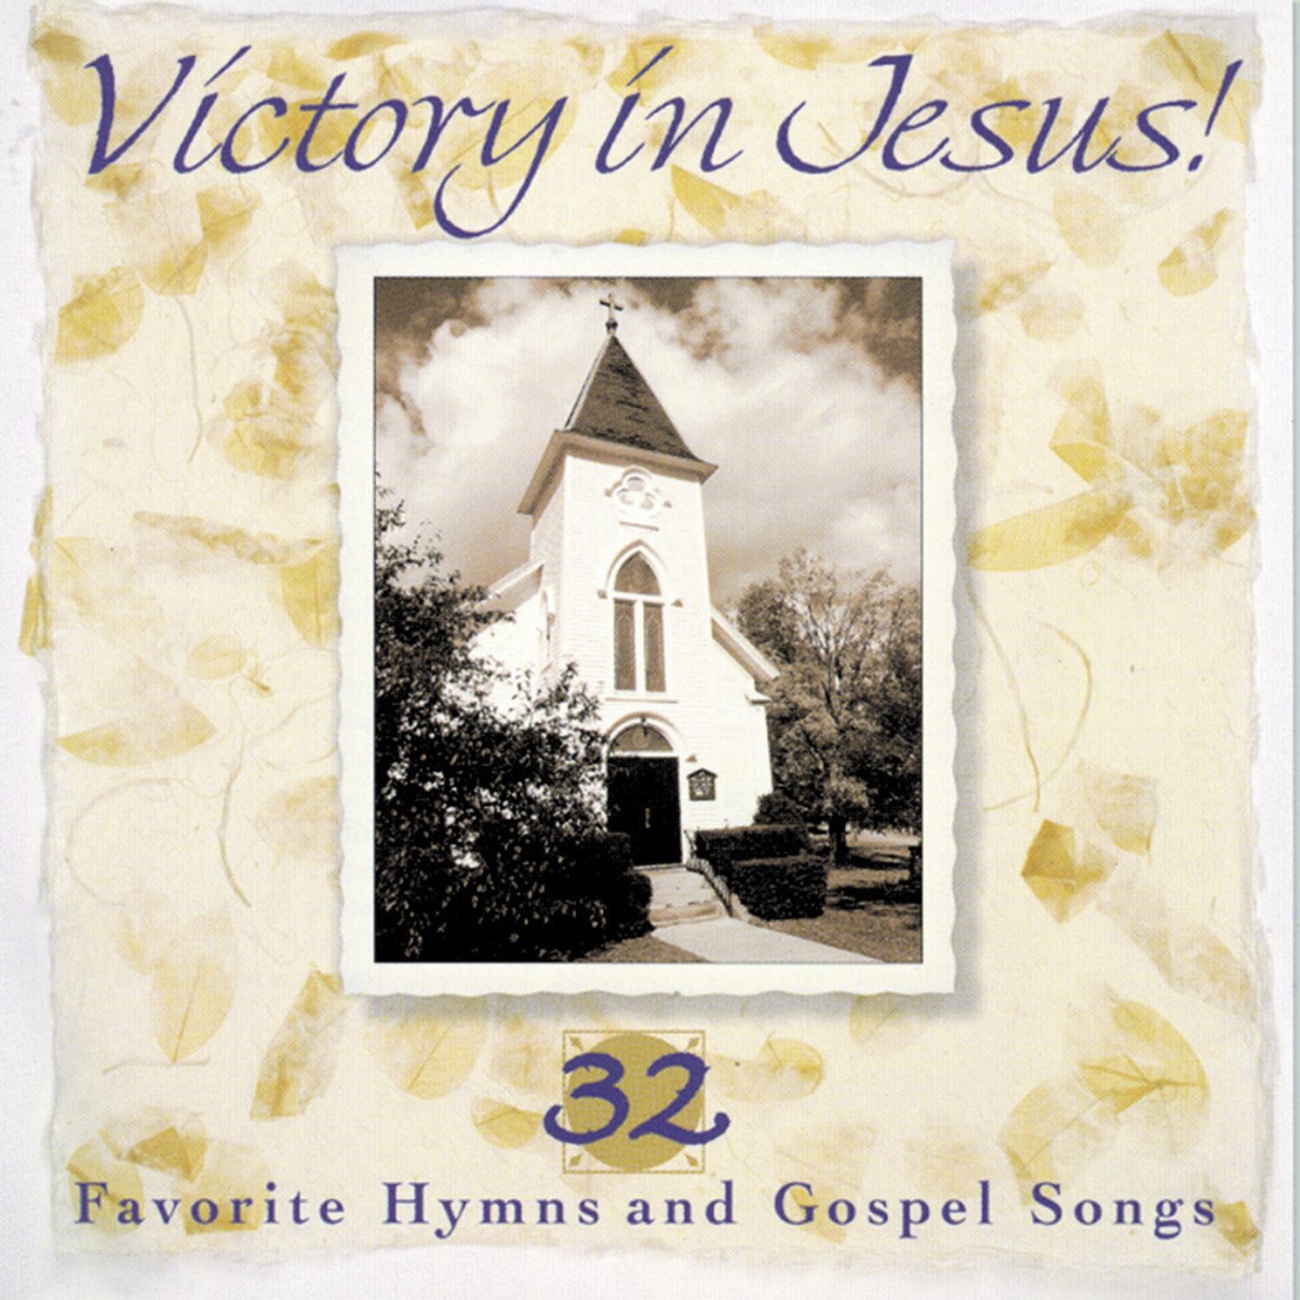 Blessed Be The Name All Hail The Power Of Jesus Name Victory In Jesus Album Version Lyrics Follow Lyrics